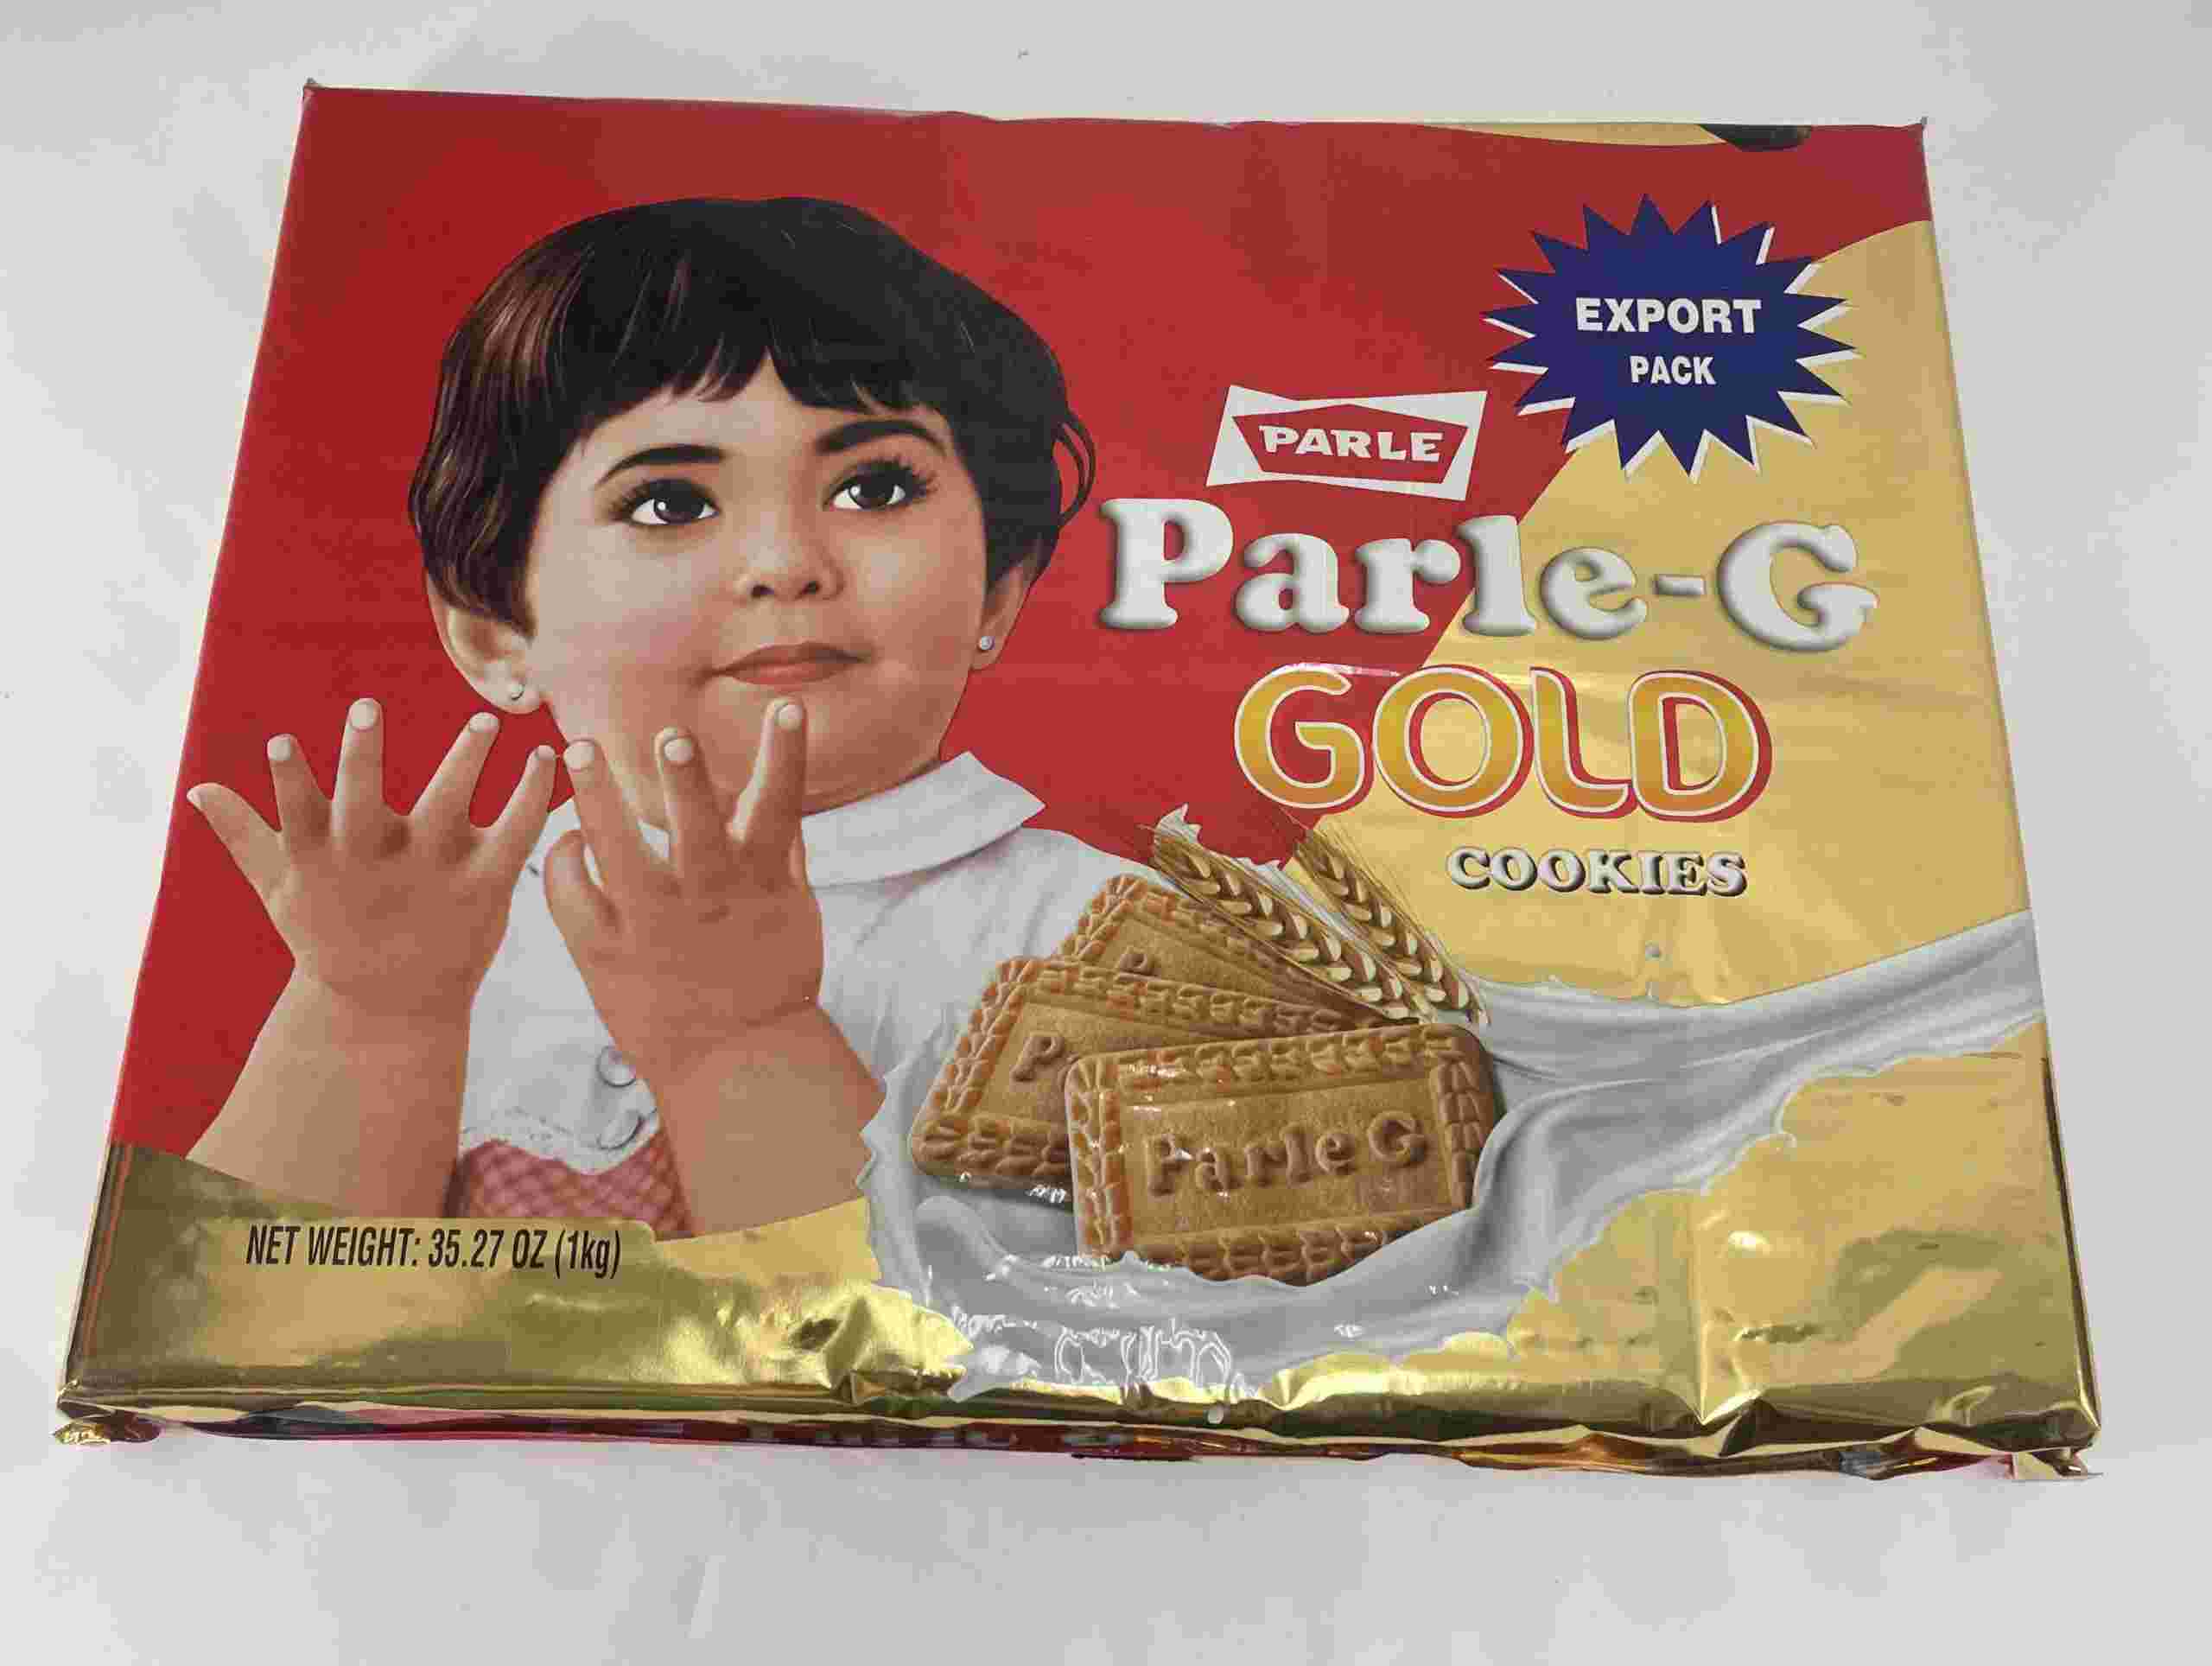 Parle Parle -G Gold